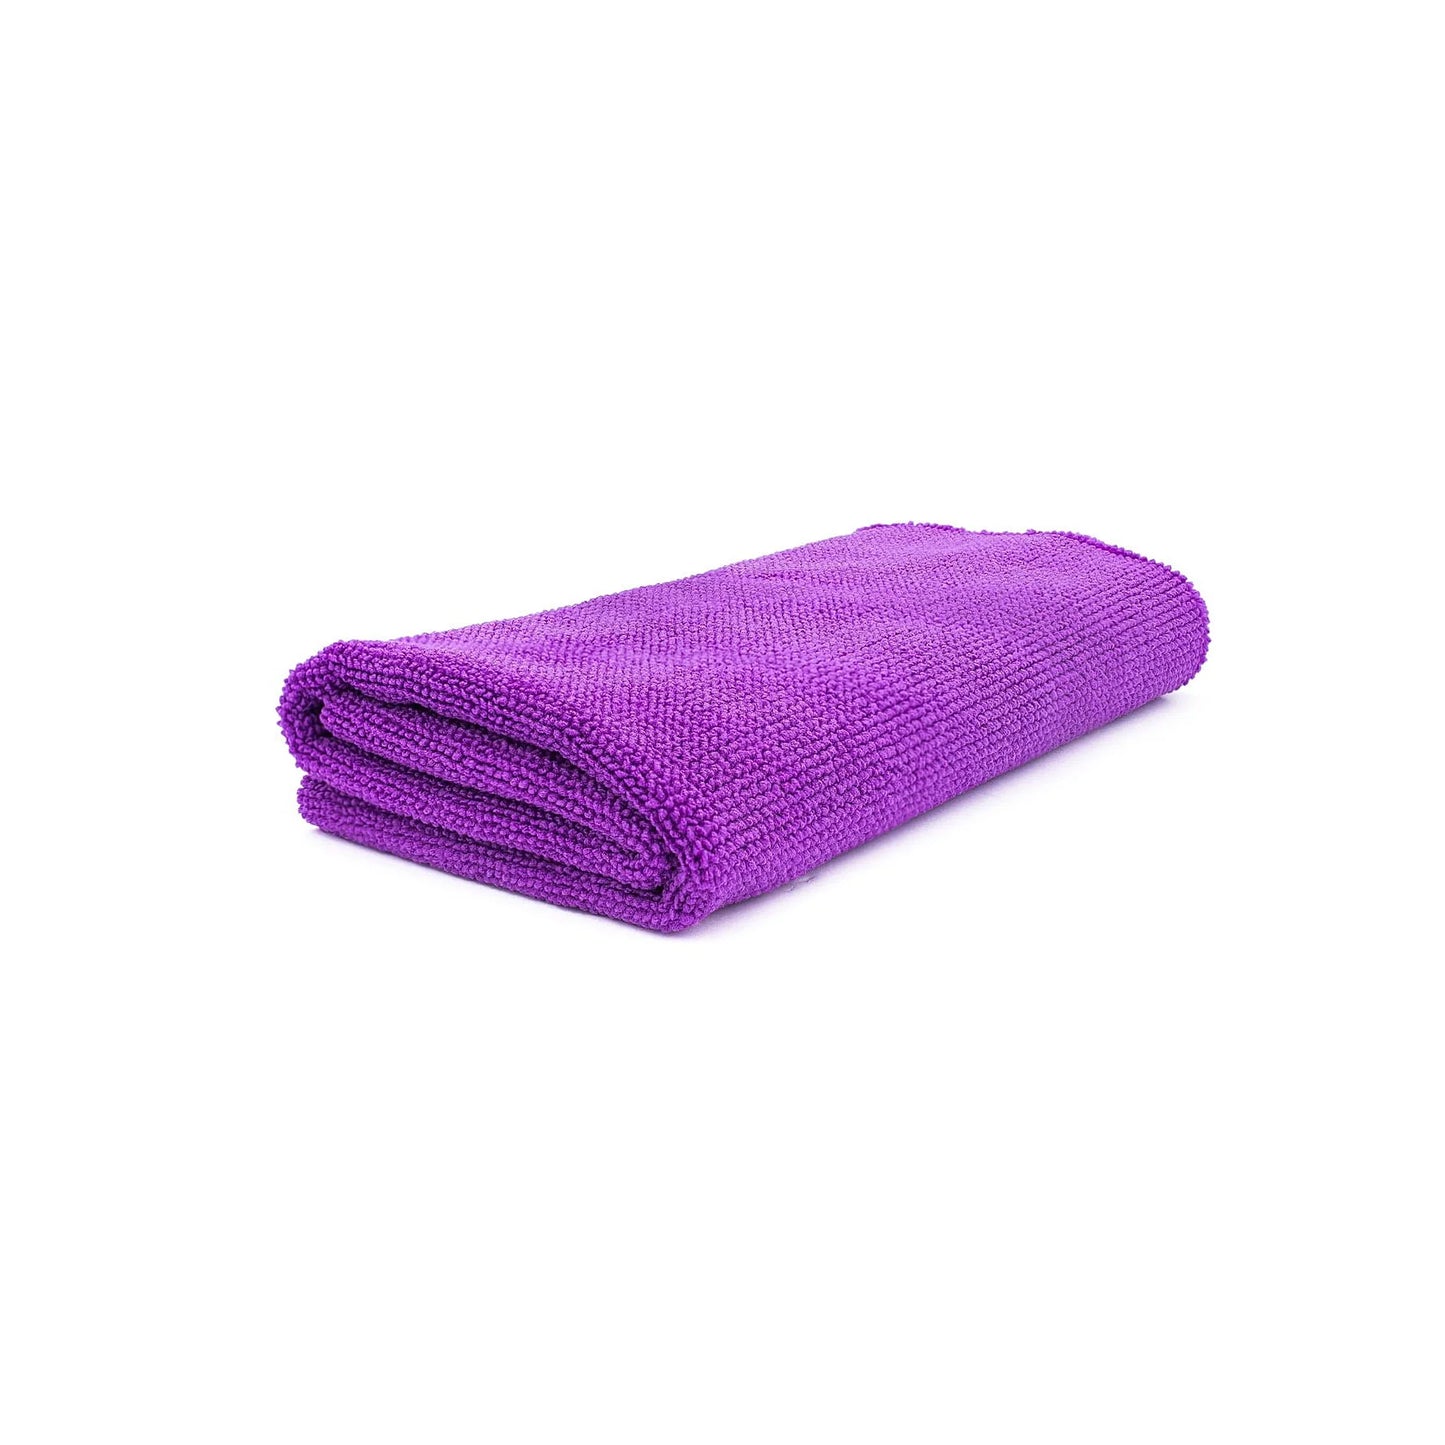 Load image into Gallery viewer, The Rag Company - The Edgeless Premium PEARL Ceramic Coating Towel- Purple
